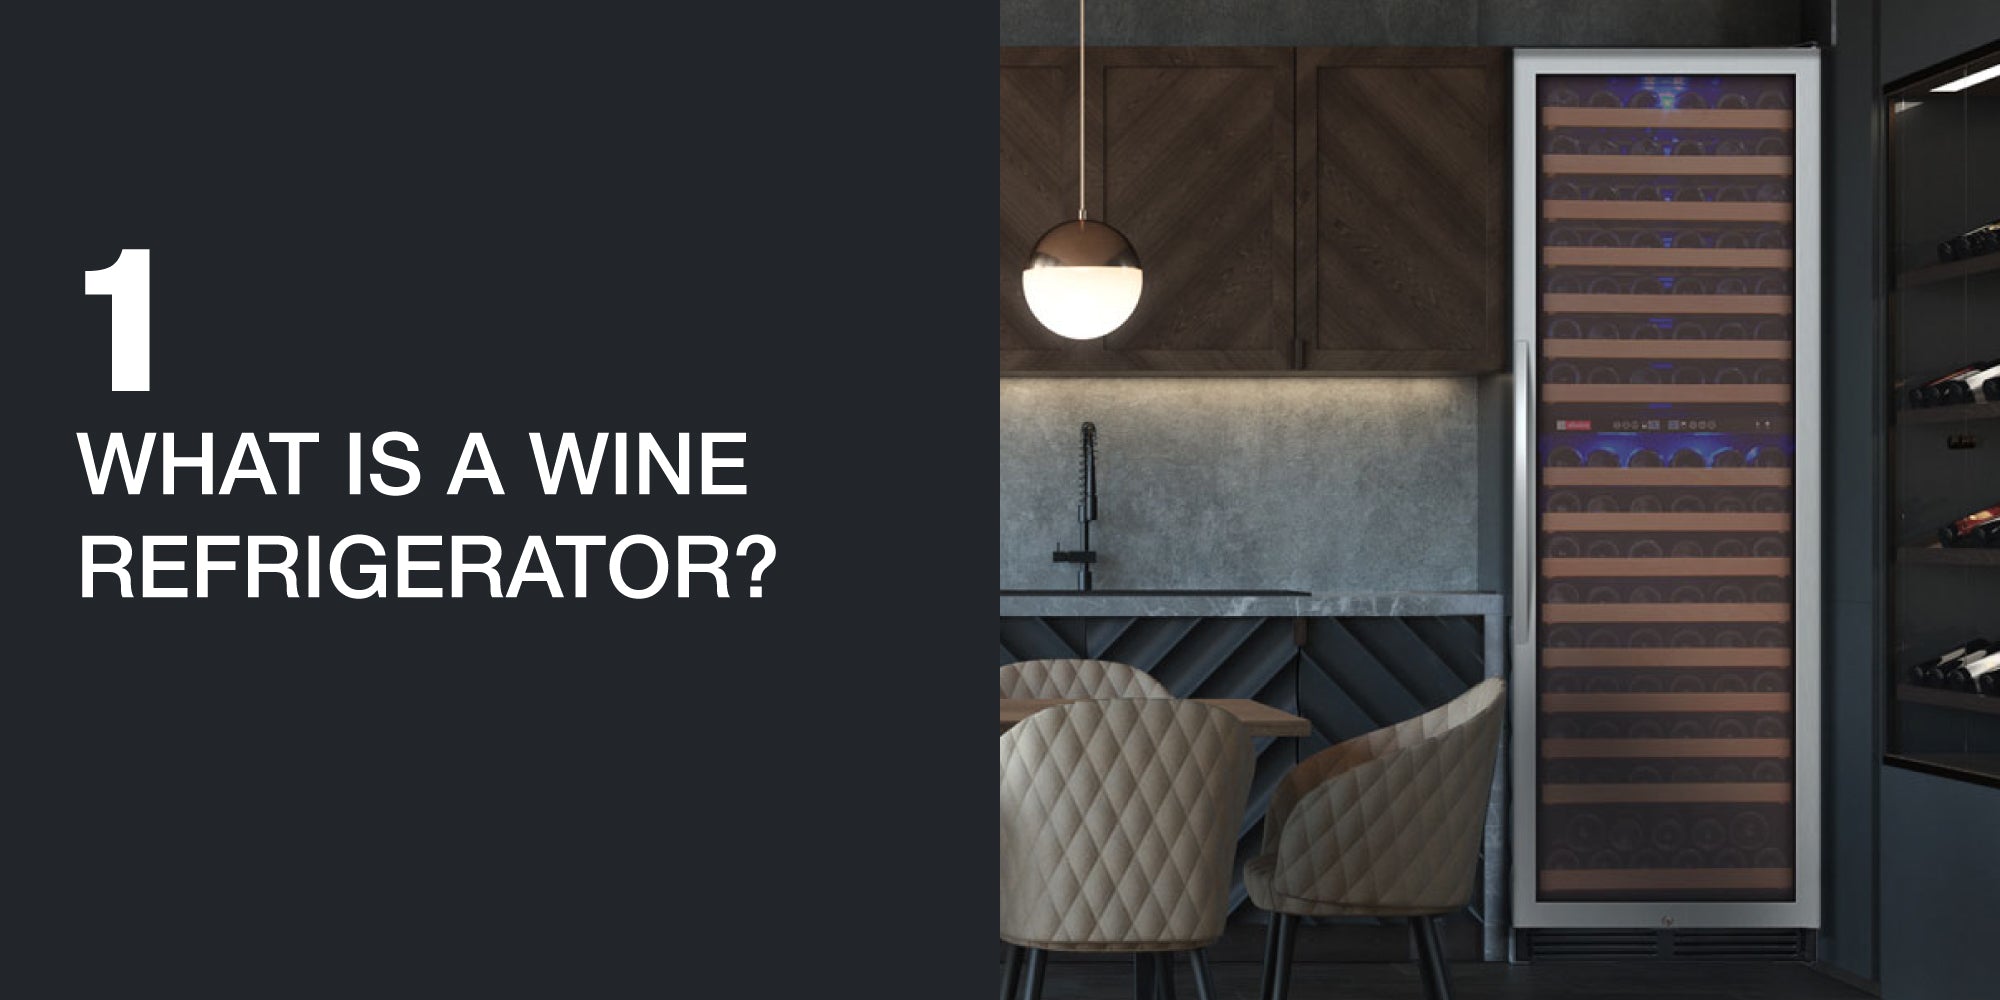 What is a wine refrigerator?